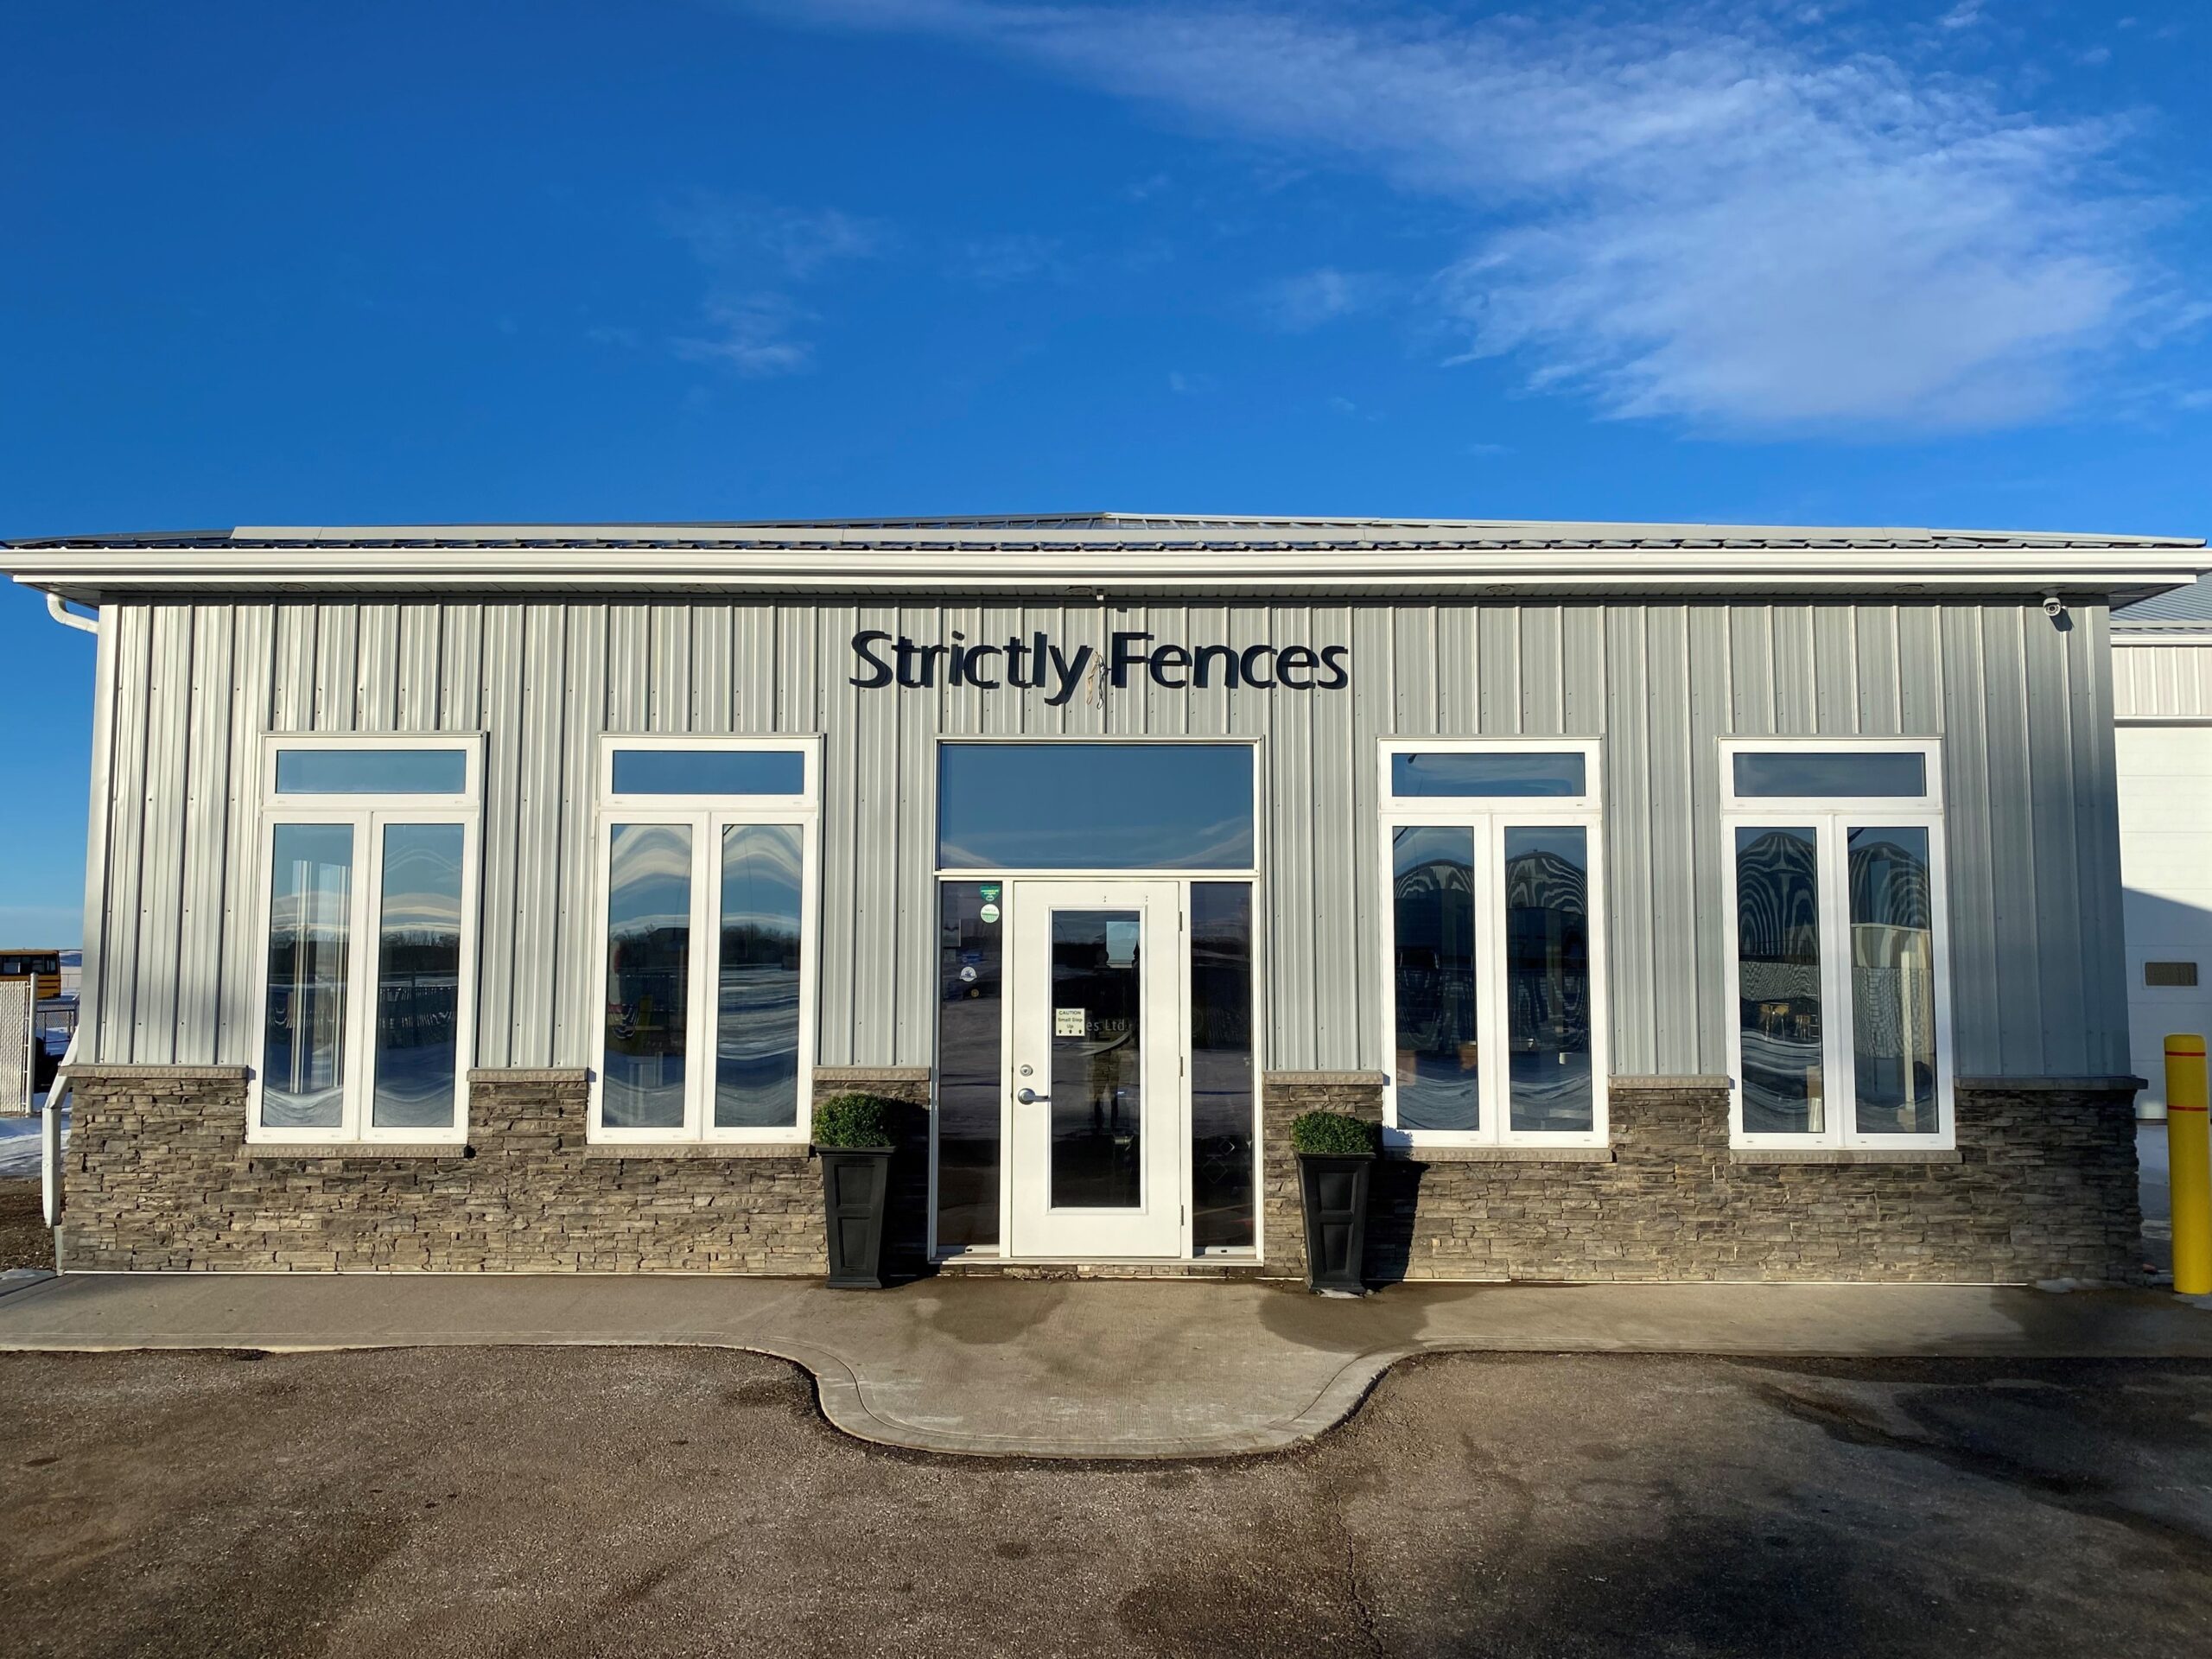 Strictly Fences building